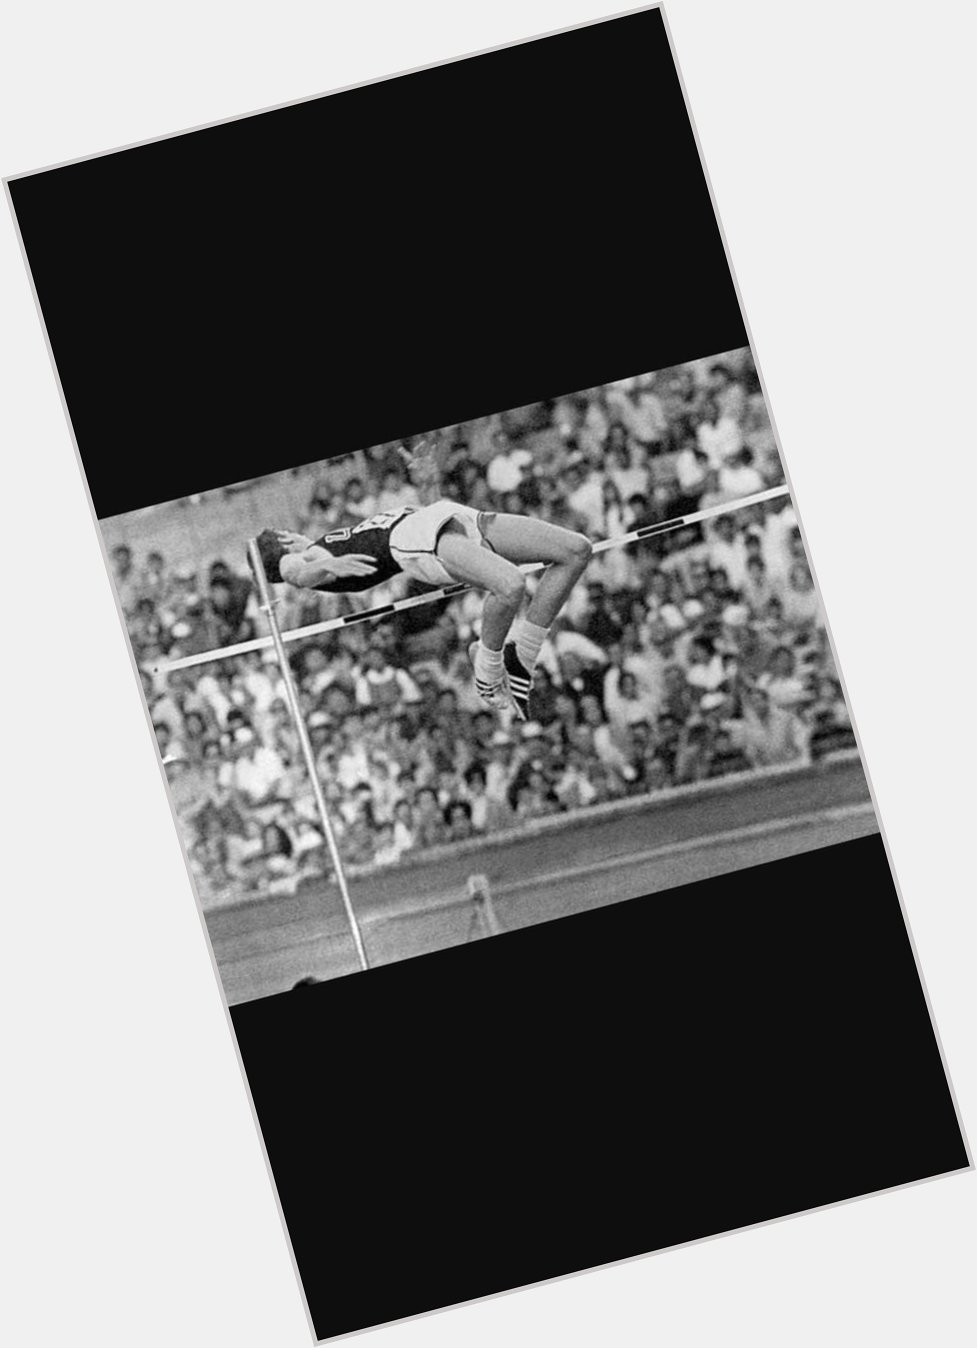 Happy Birthday to the man who made it possible, Dick Fosbury! 